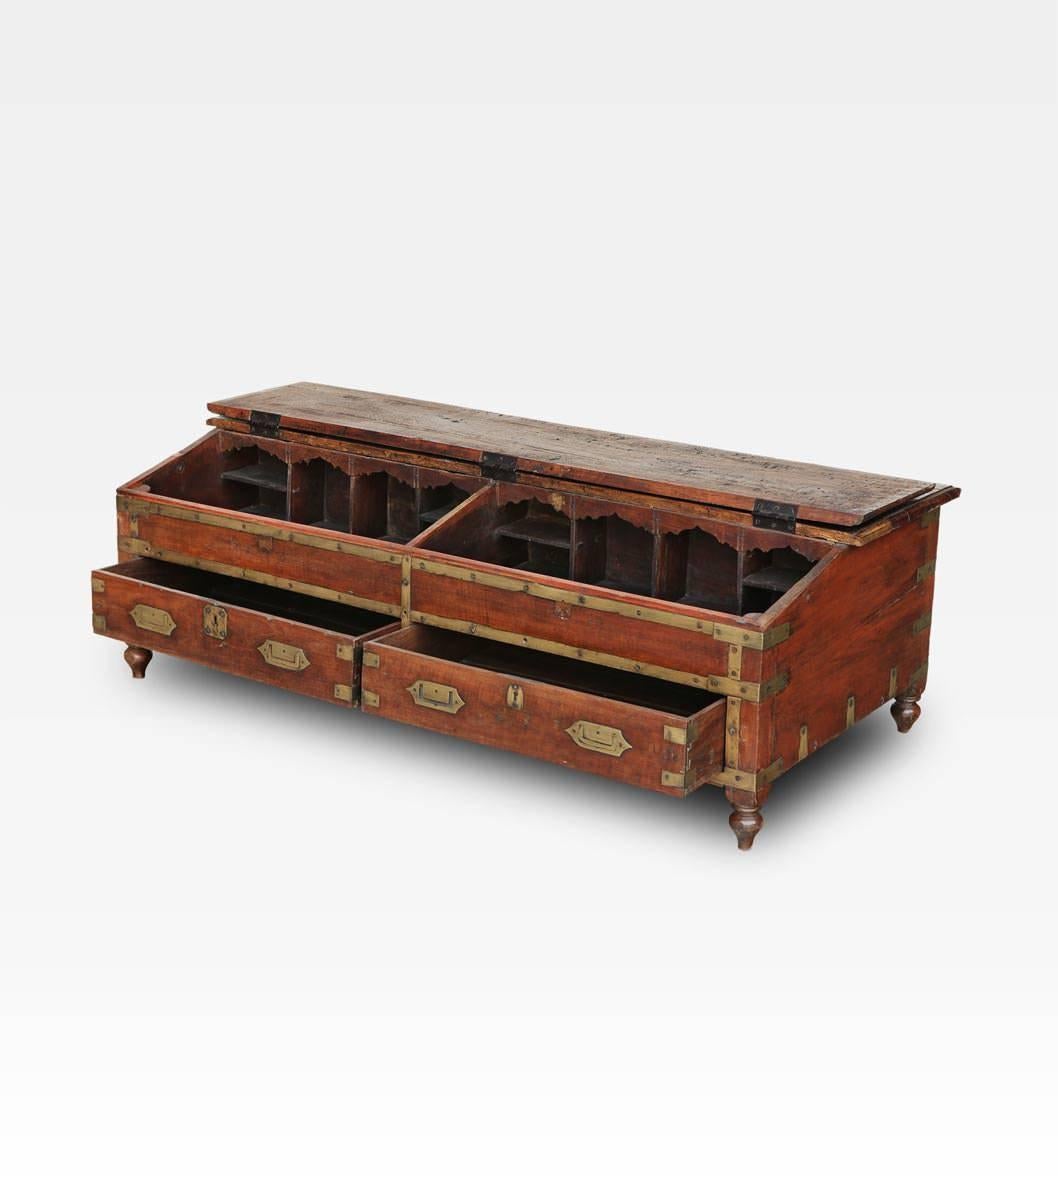 This small Indian travel trunk tells about stories of the Europeans who, defying the sea, arrived to the East. Also used as a desk by the captain of the ship, under the top on can see typical Indian design. The many small compartments and niches